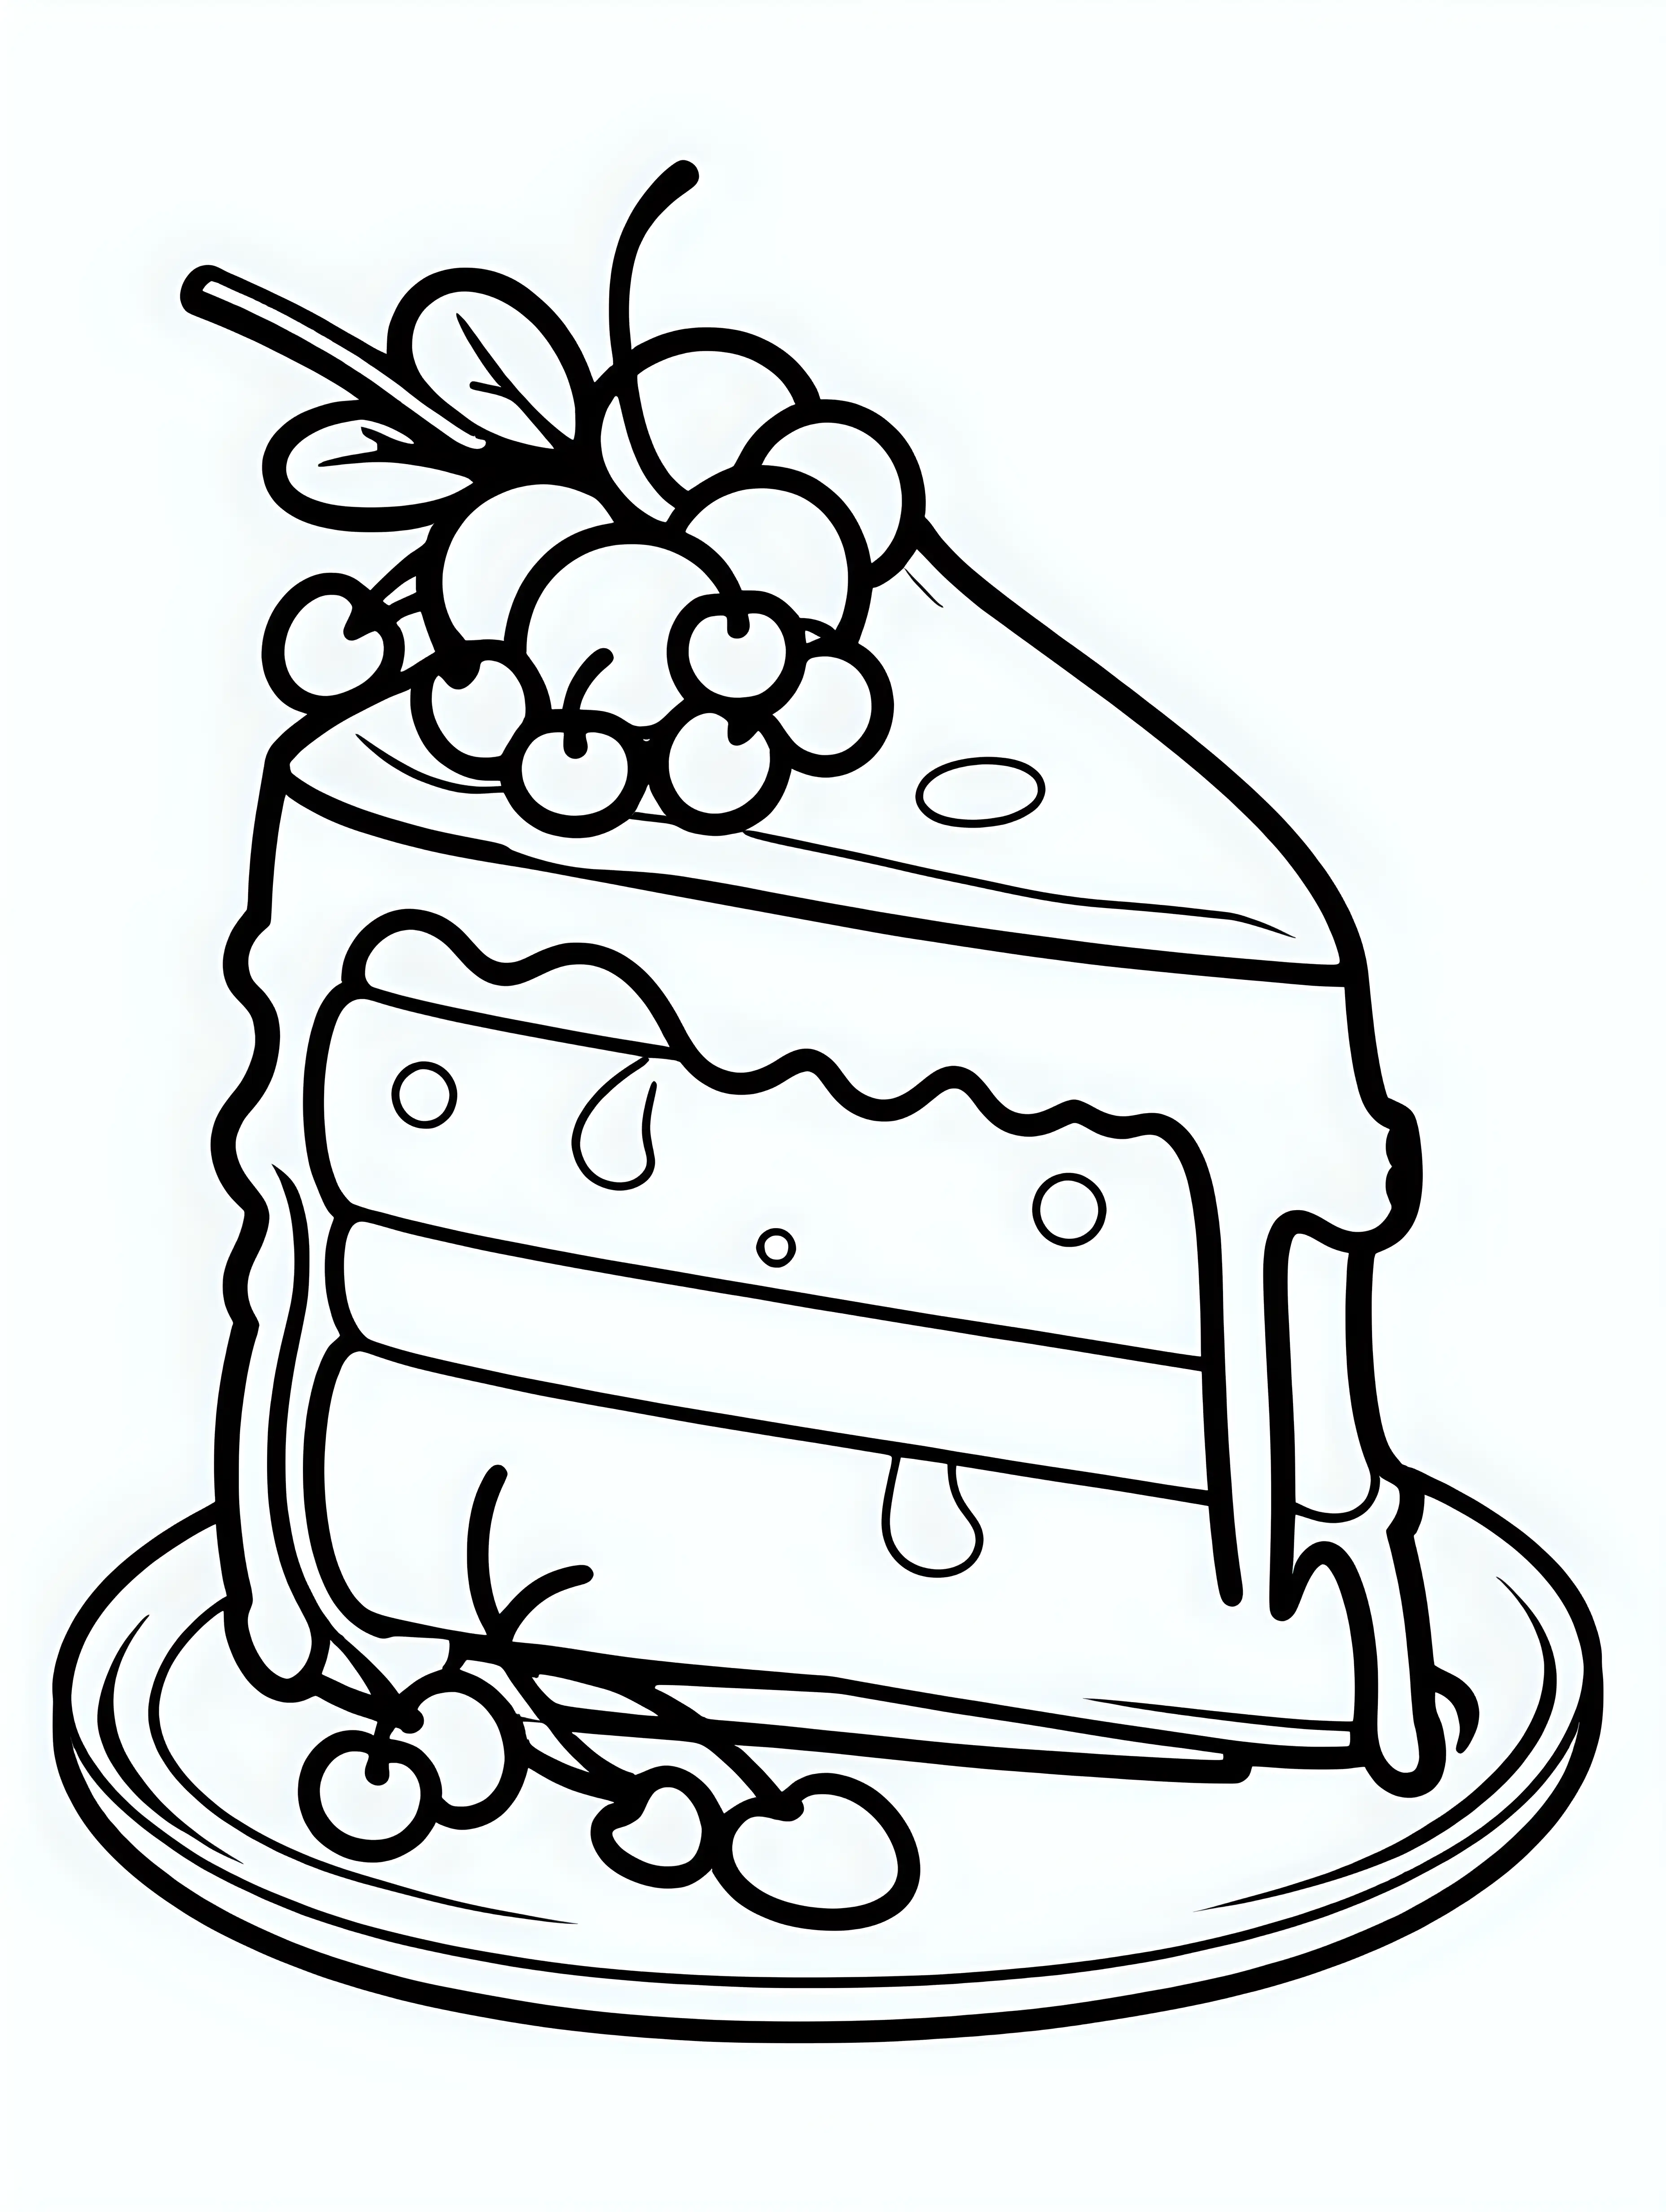 coloring book, cartoon drawing, clean black and white, single line, white background, cute large cherry cheesecake slice, emojis